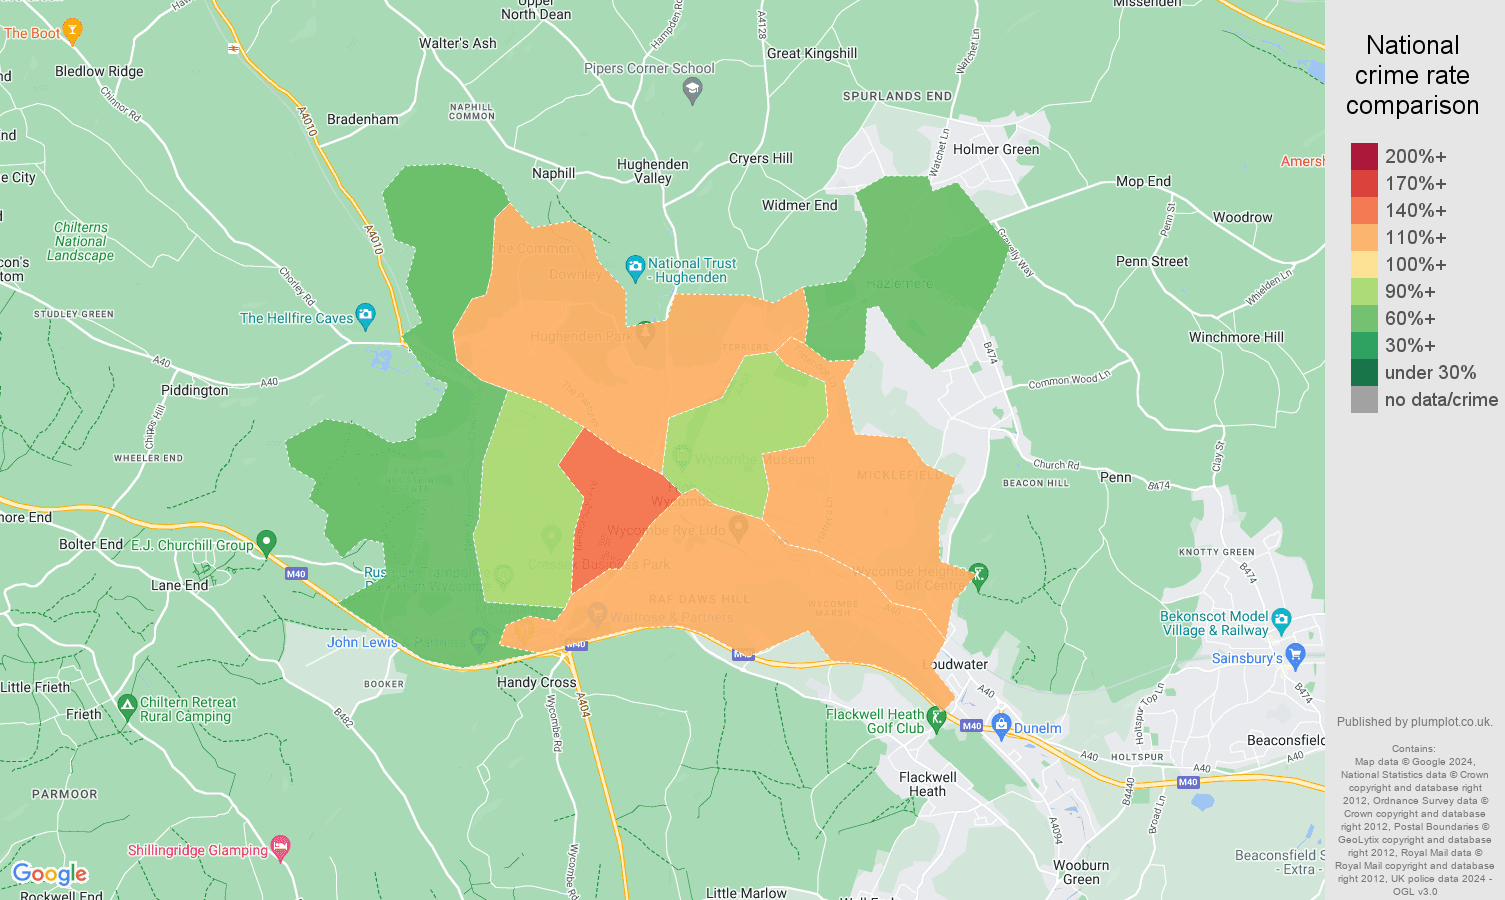 High Wycombe crime rate comparison map